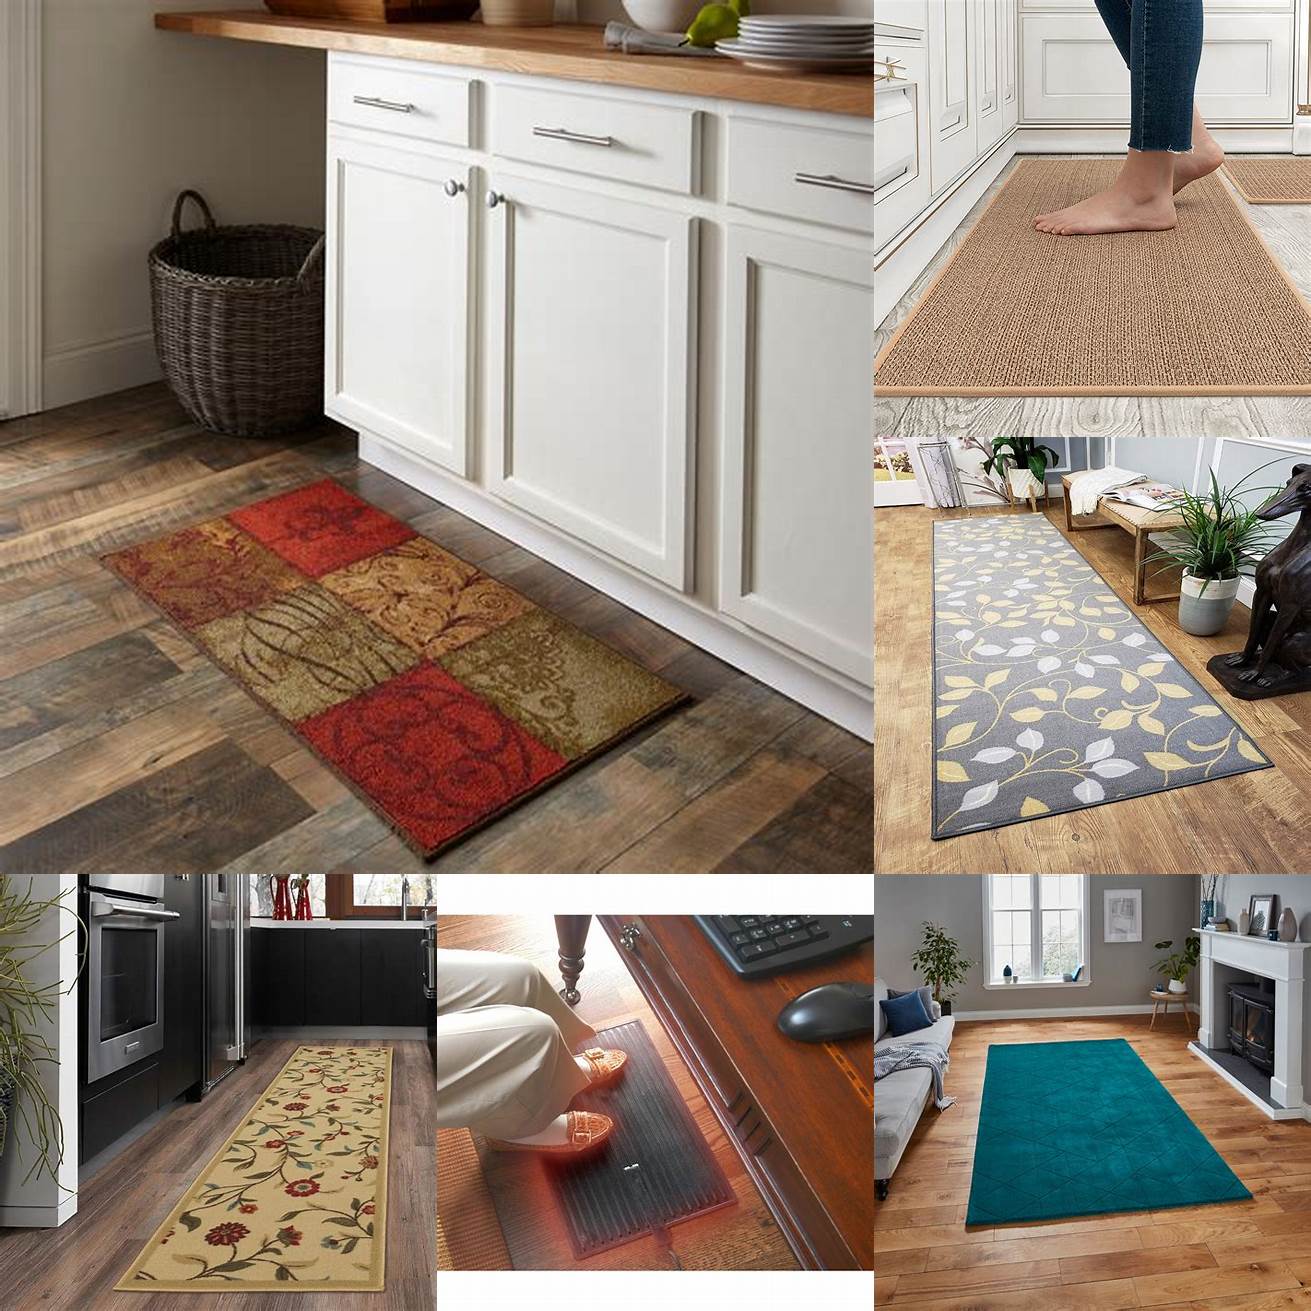 Warmth Kitchen area rugs keep your feet warm during cold winter months